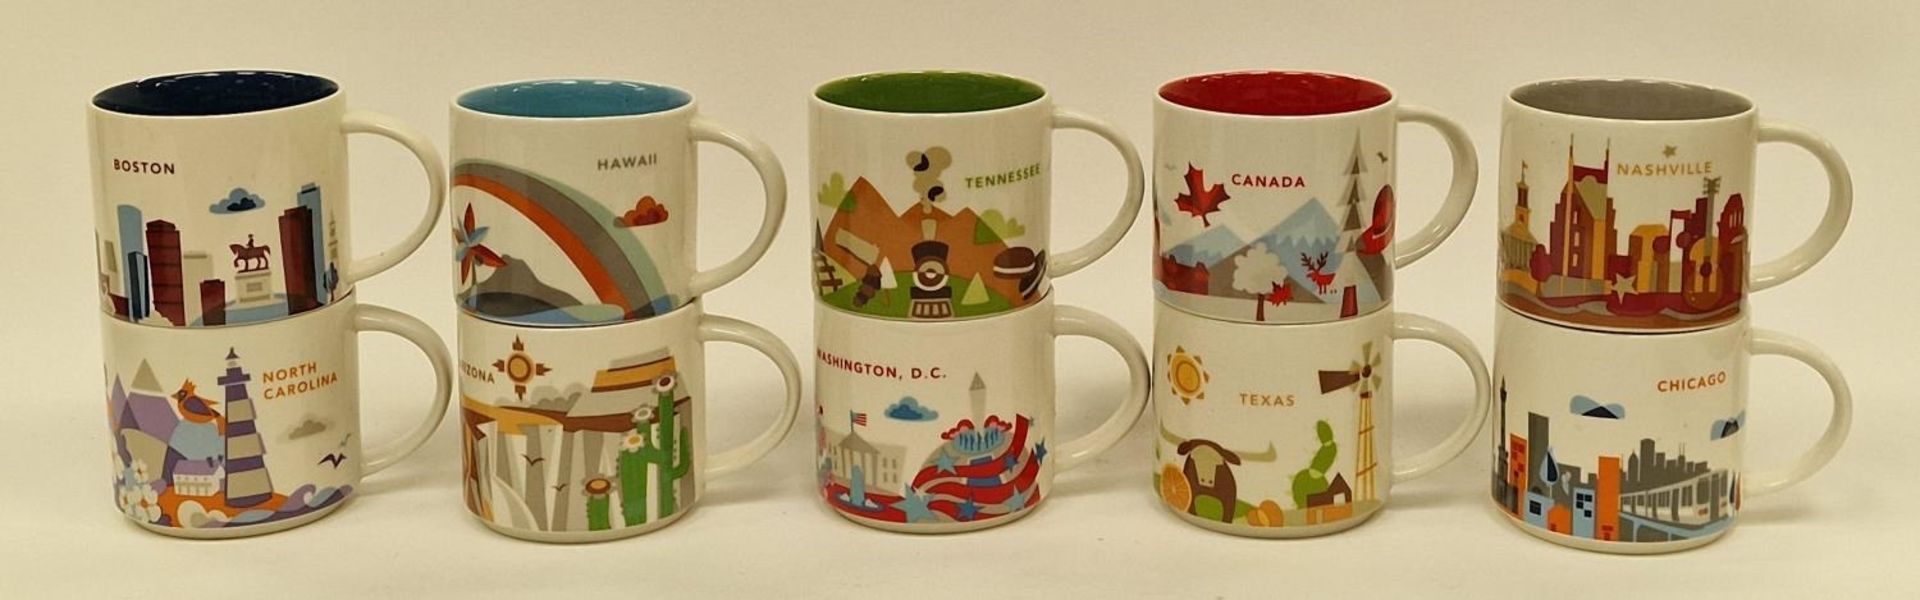 Starbucks "You Are Here" collection of U.S. and other porcelain mugs to include Boston, Texas,